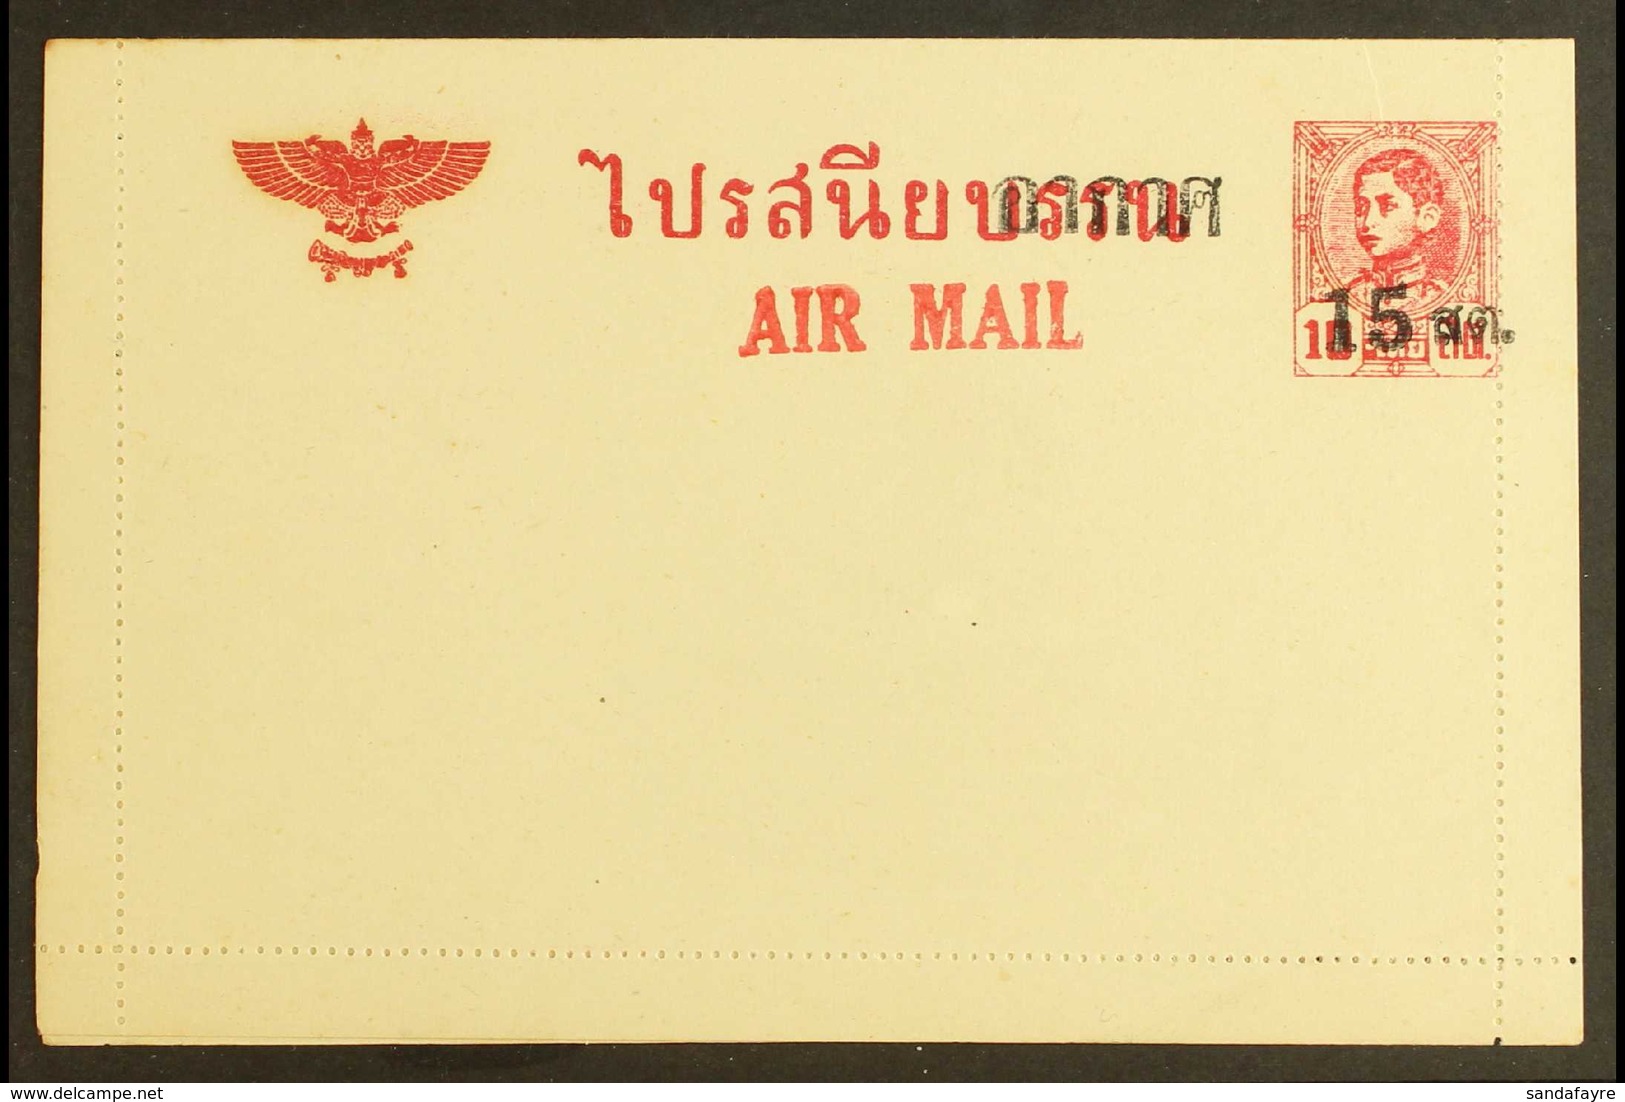 1948 (circa) UNISSUED AIR MAIL LETTER CARD. 1943 10stg Carmine Letter Card With Additional "Air Mail" Inscription & 15st - Thailand